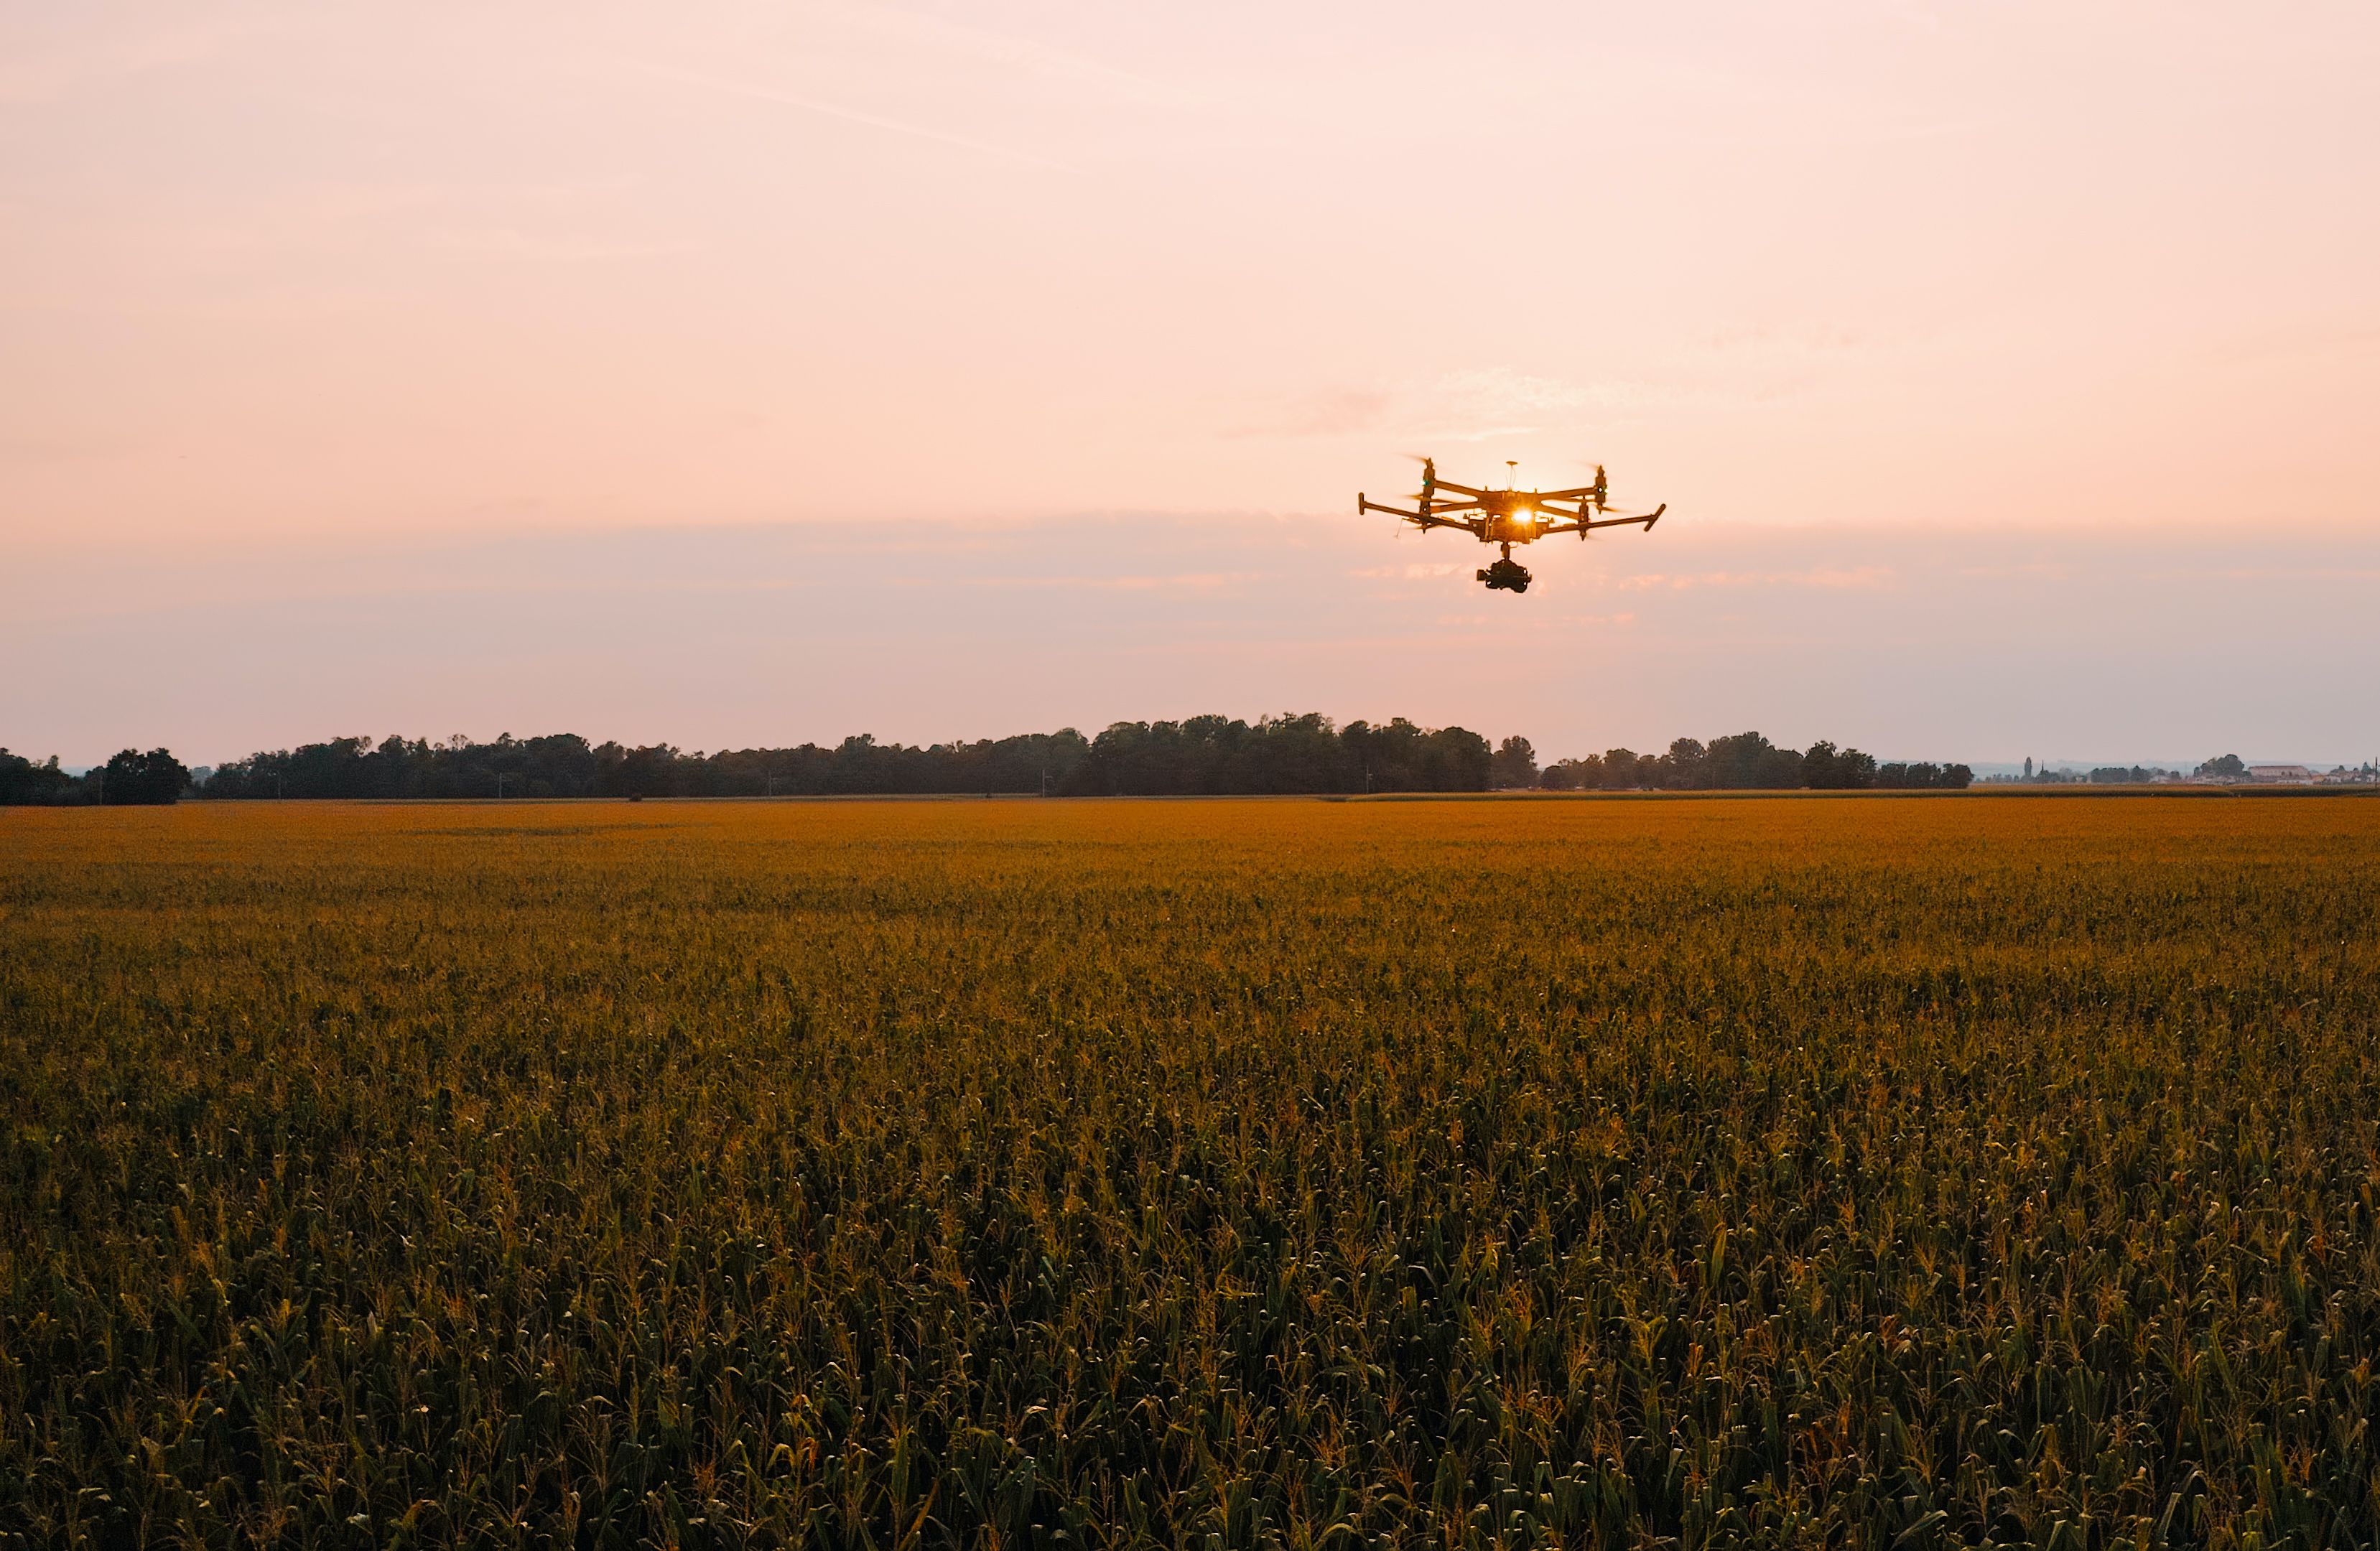 Landscape with a drone flying above a field during sunset with the sun shining in the background